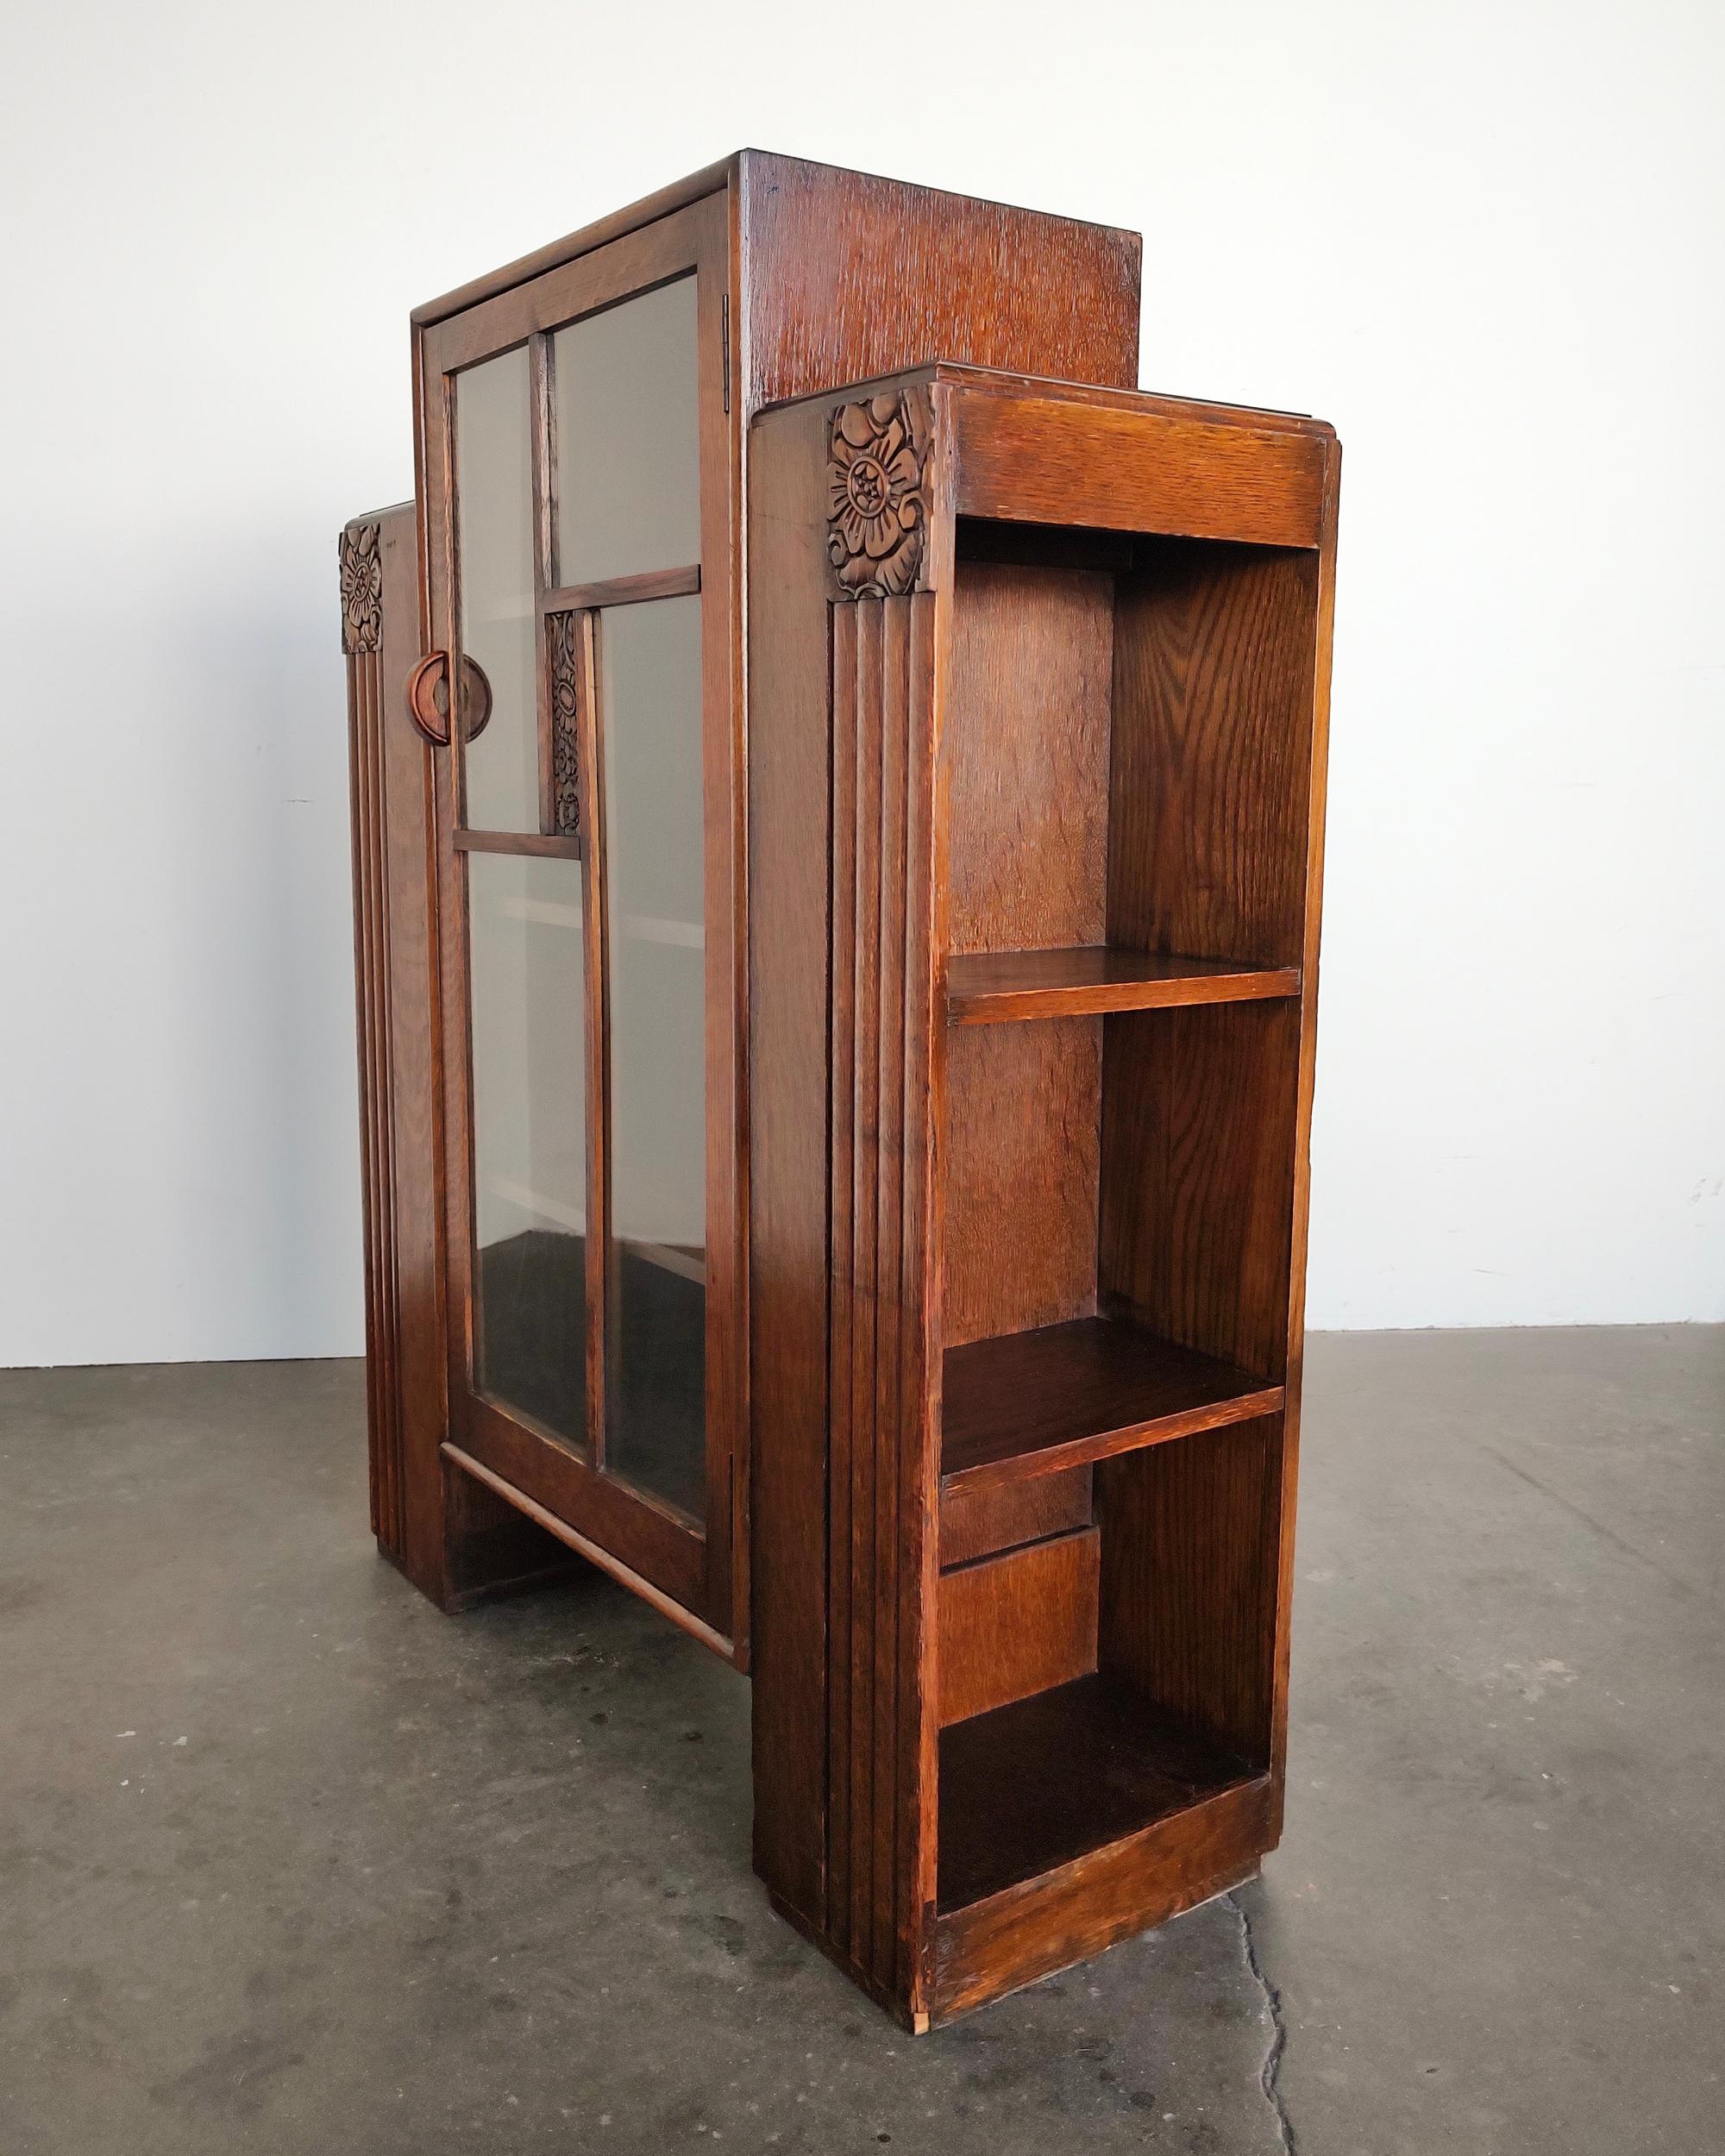 Tiger oak Art Deco cabinet with glass doors and side shelves. Beautiful design with hand carved details. Perfect as a bar or display cabinet or bookshelf. Overall great vintage condition. 

32.75